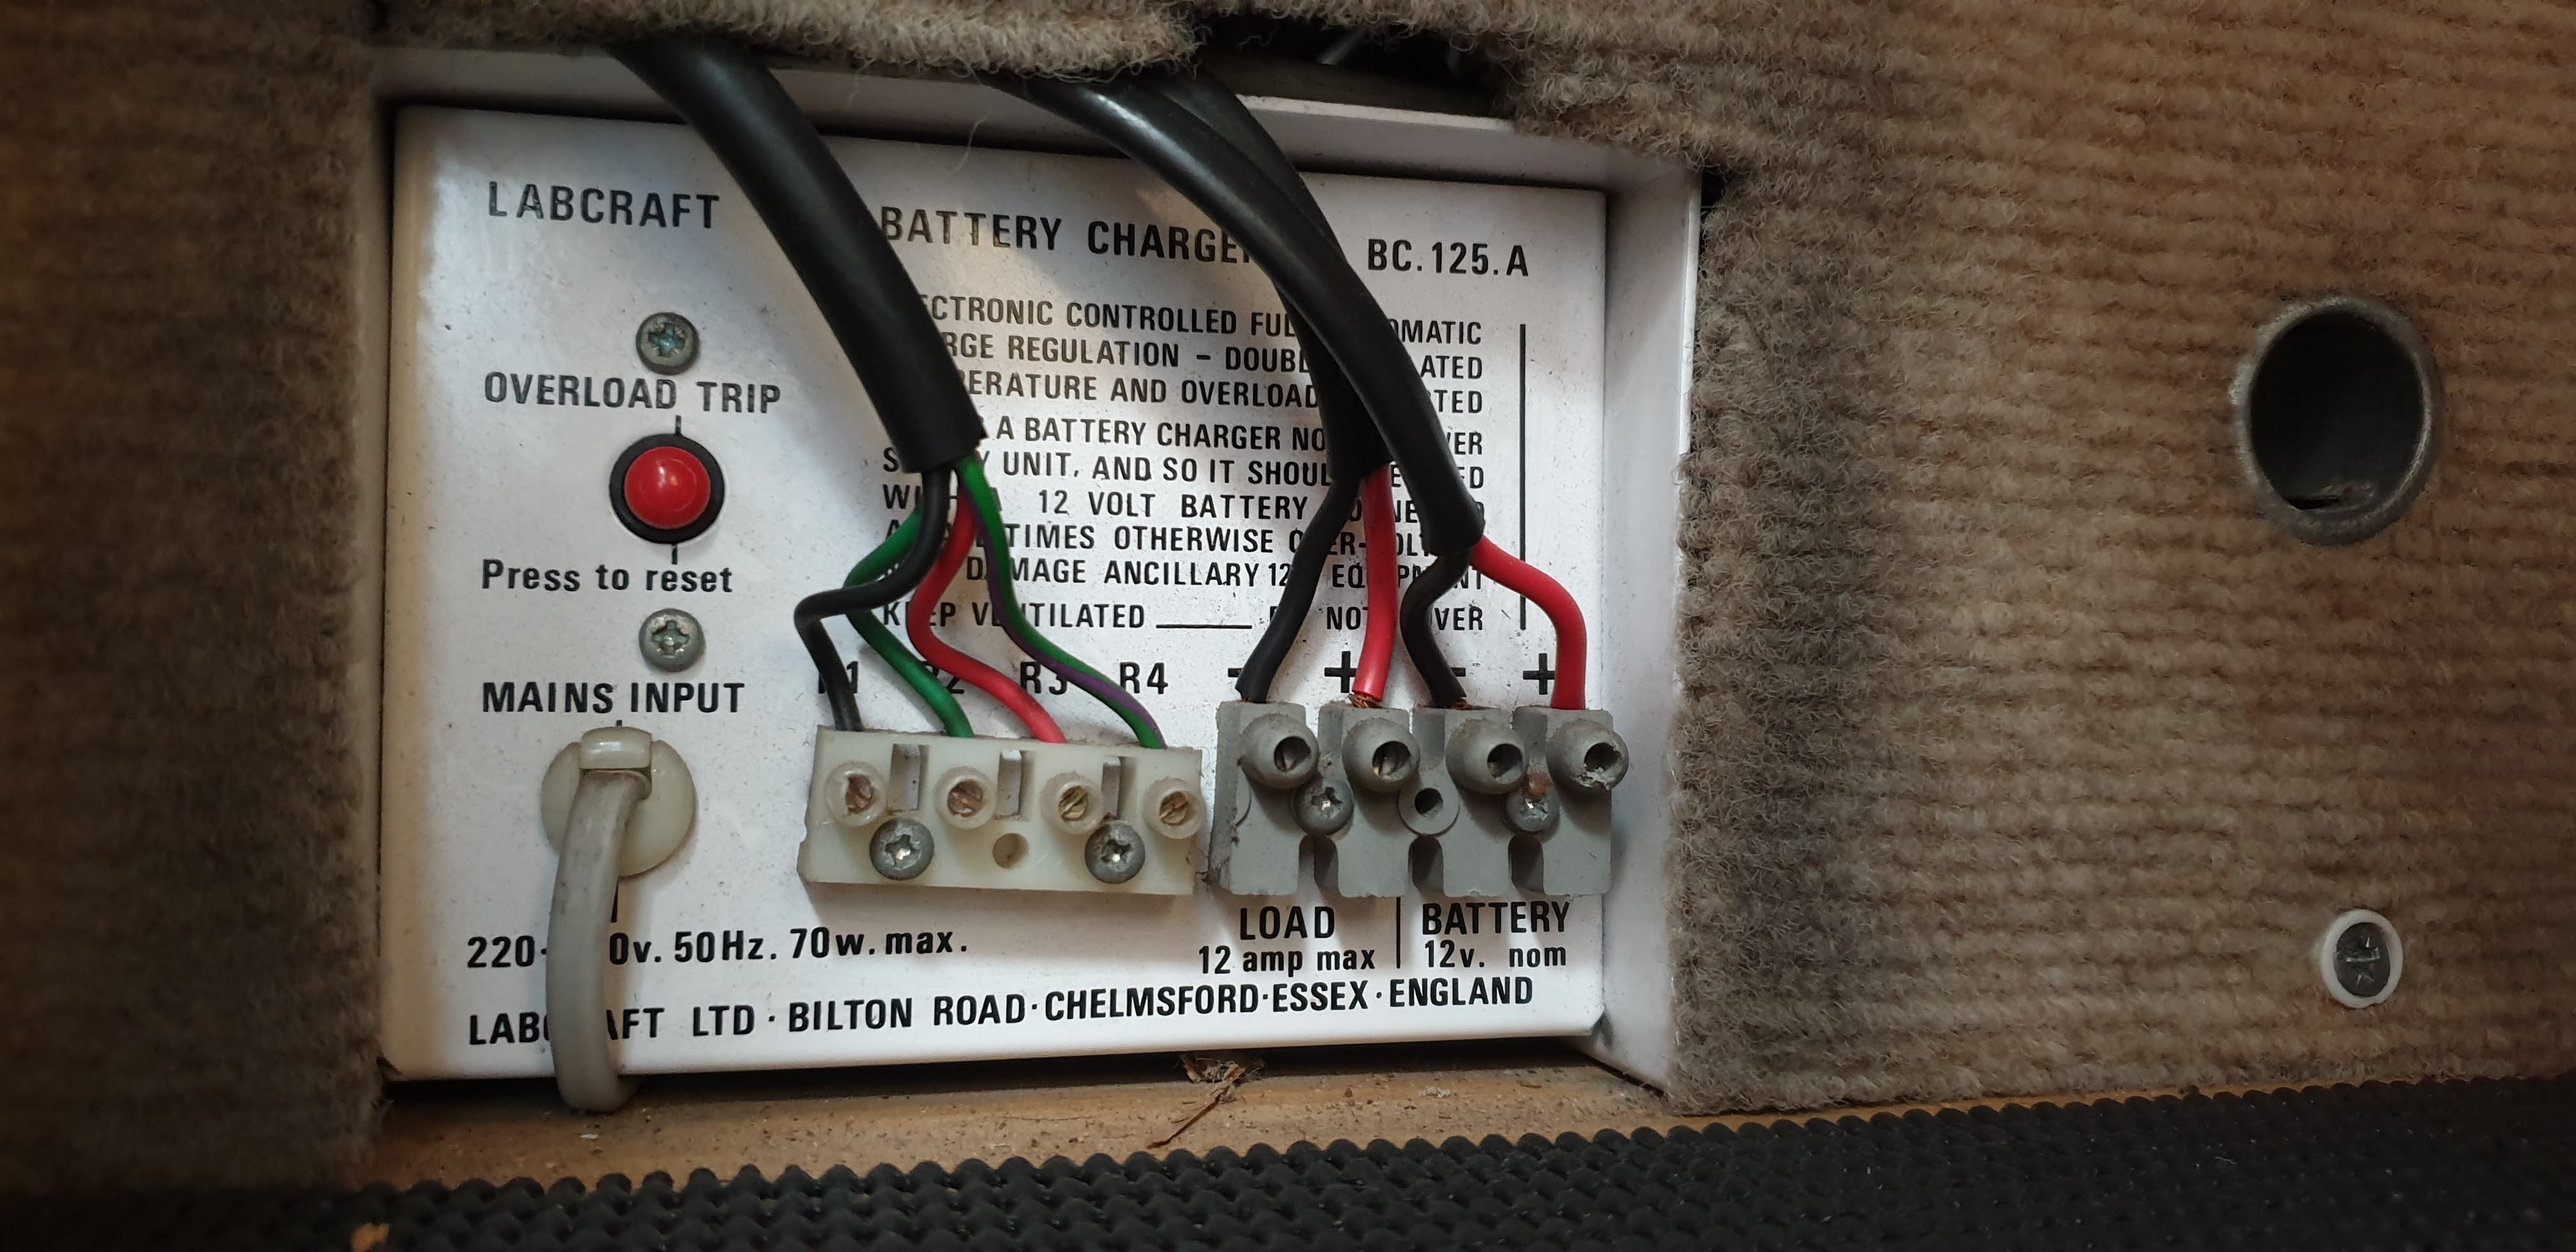 Permanently fitted leisure battery charger?